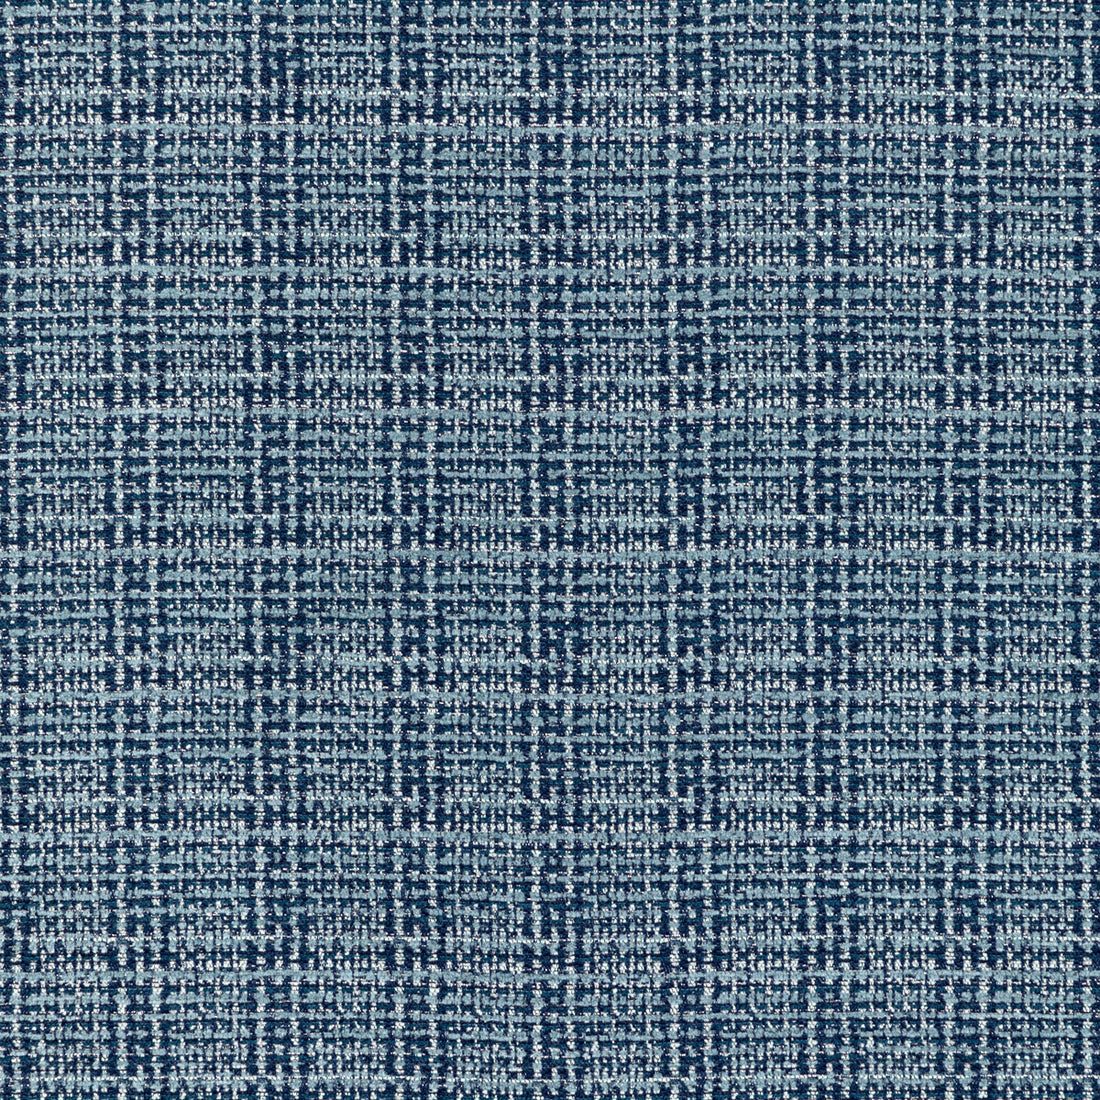 Ferla fabric in lapis color - pattern 36313.5.0 - by Kravet Contract